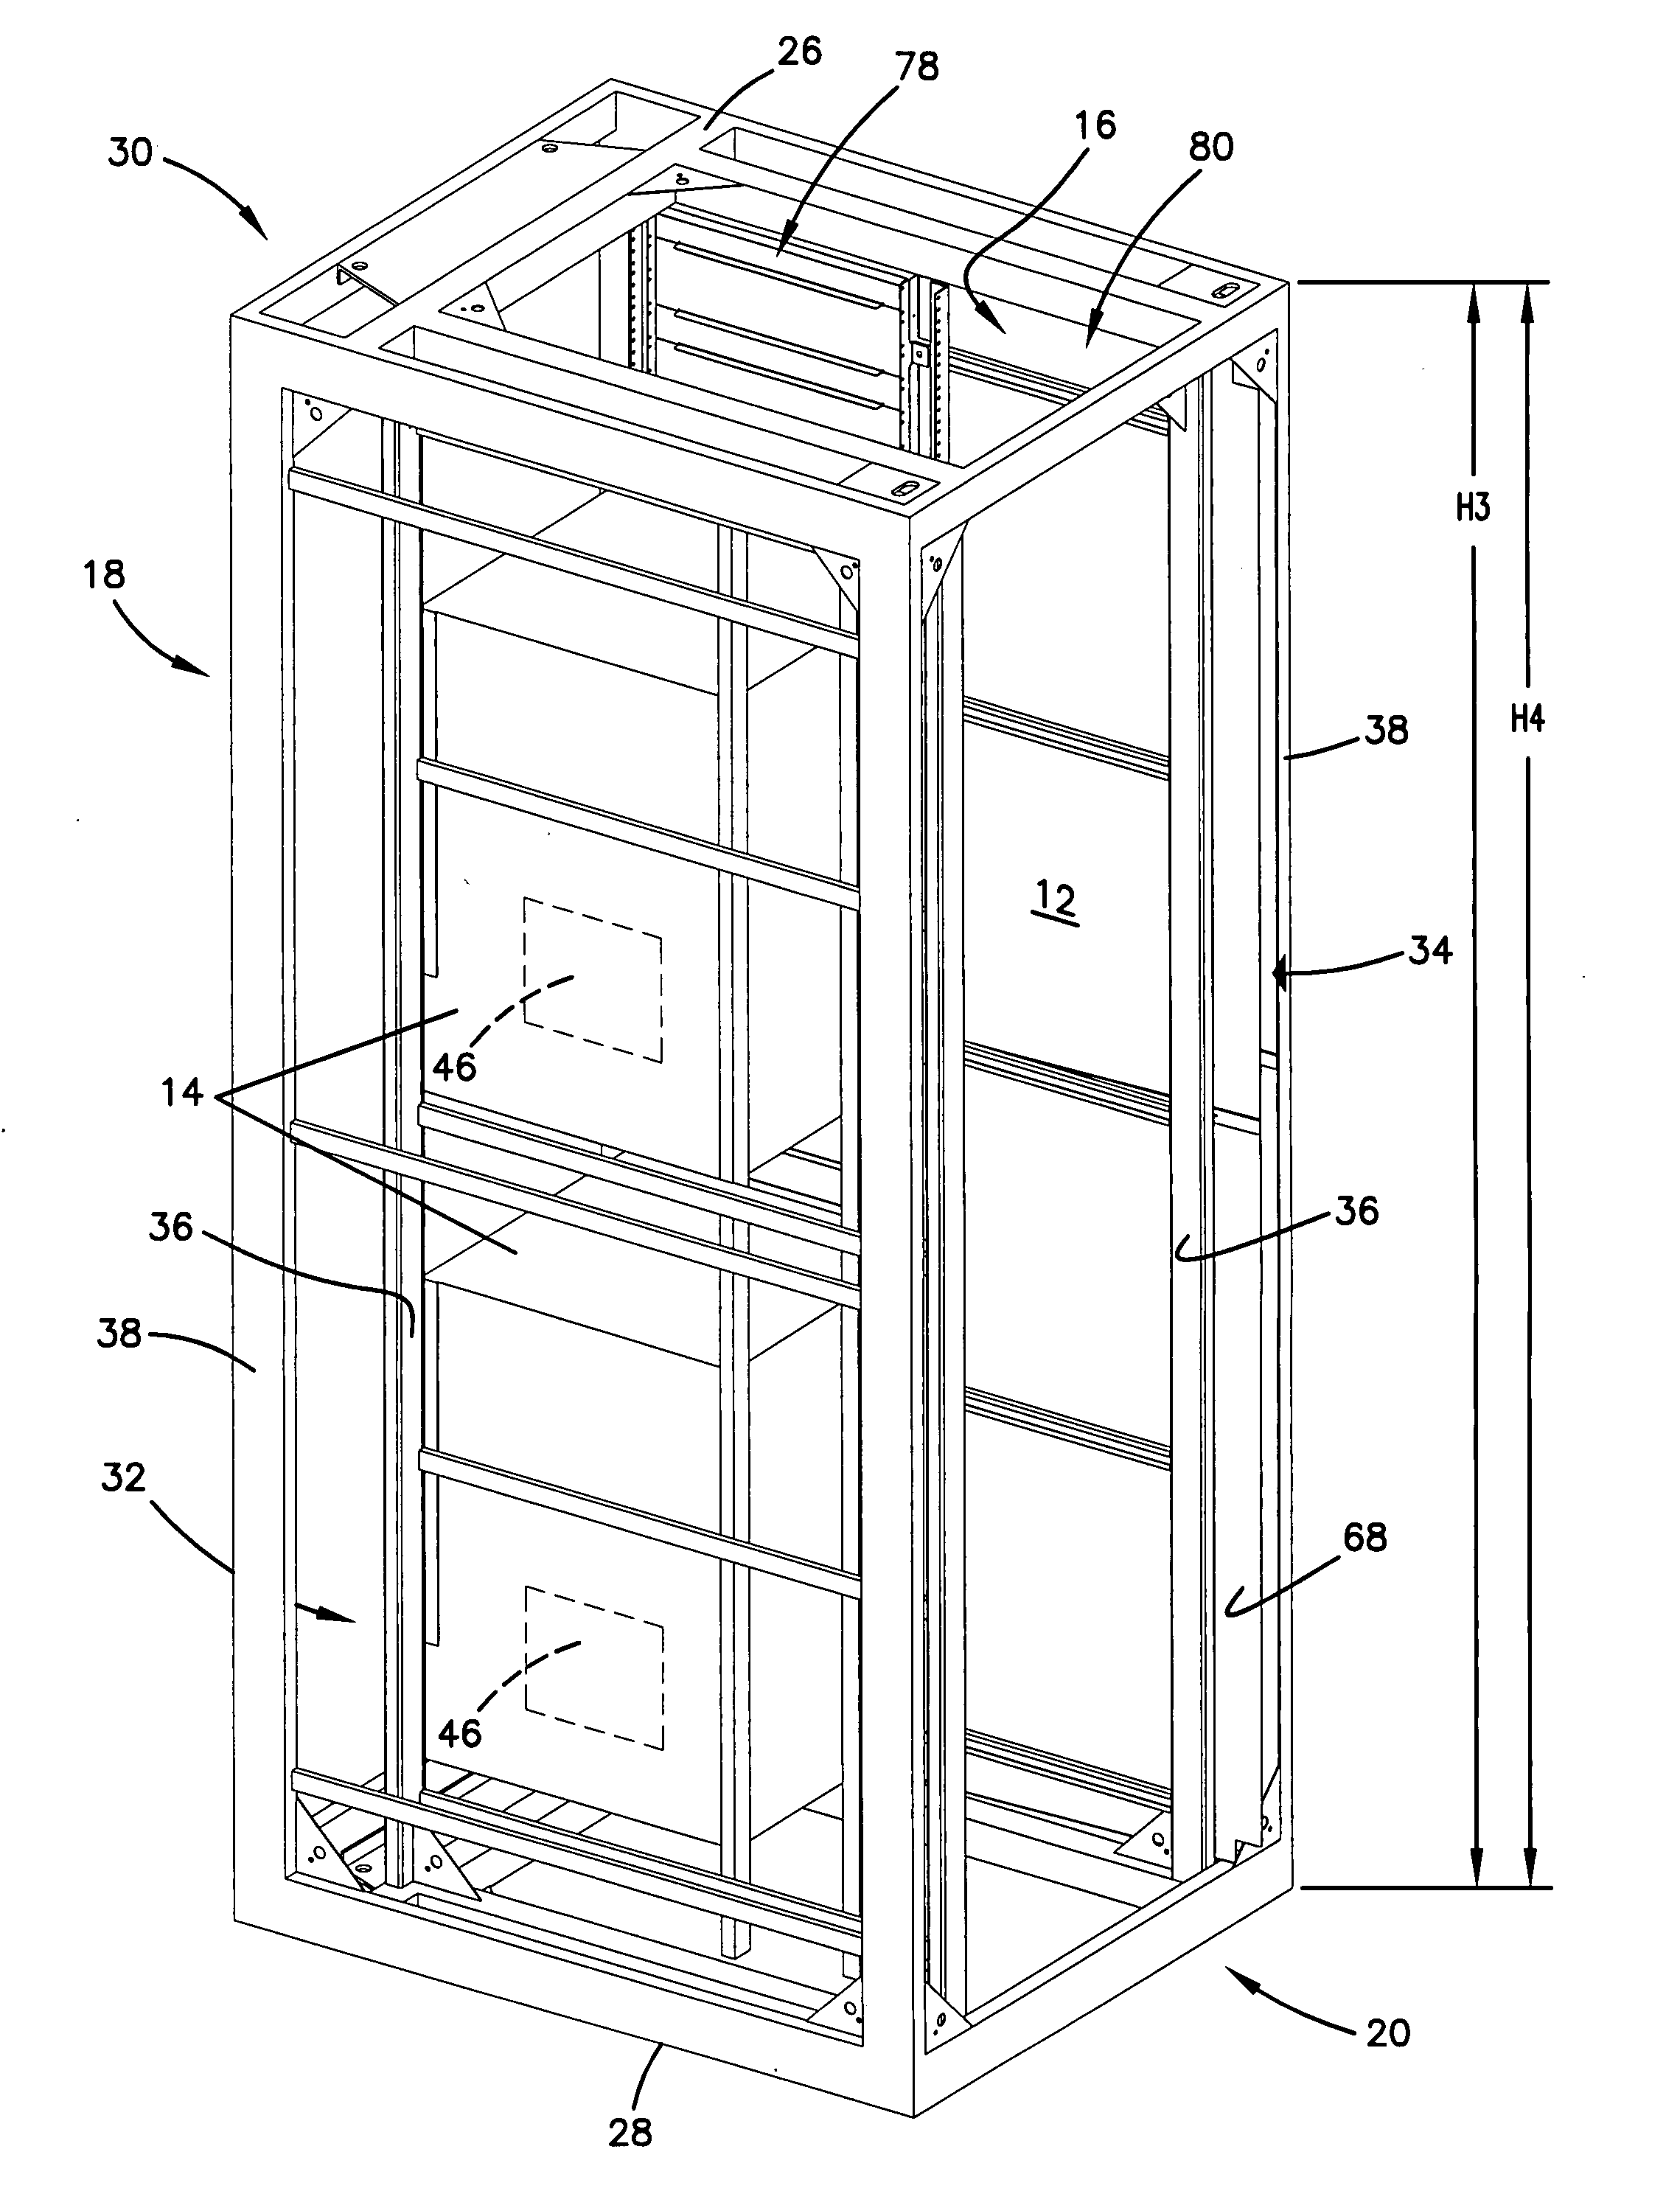 Telecommunication cabinet with airflow ducting